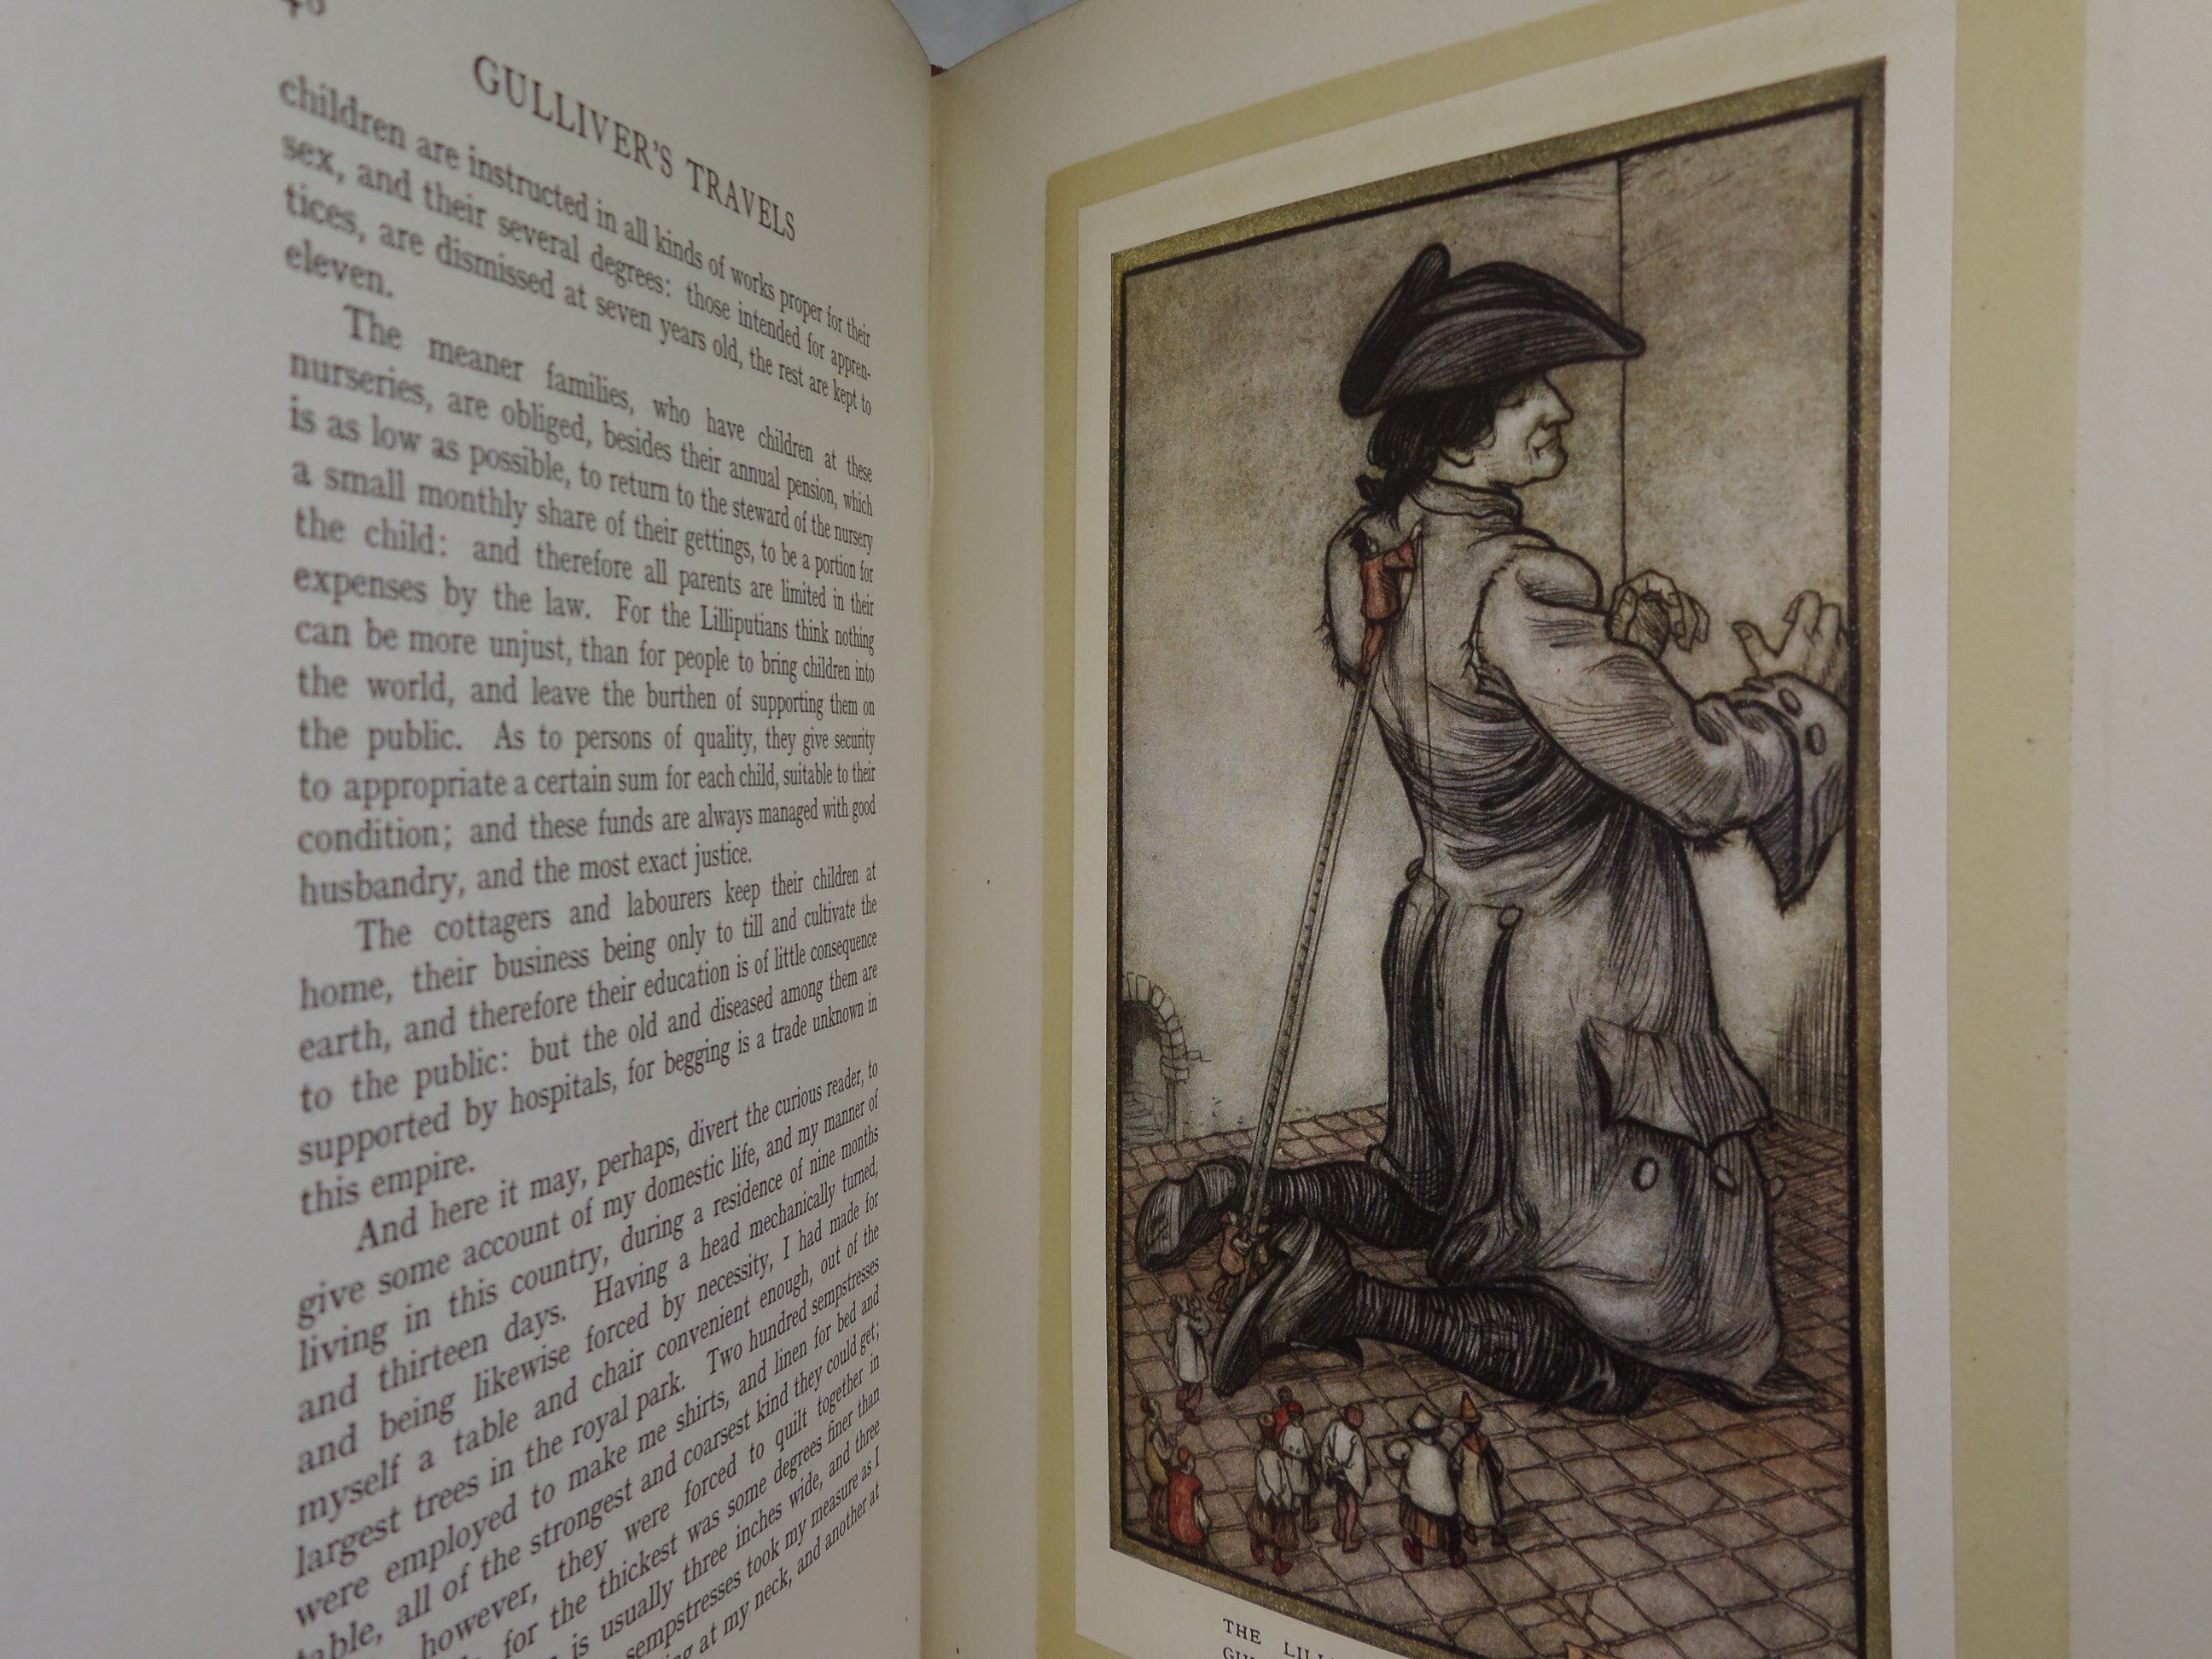 GULLIVER'S TRAVELS BY JONATHAN SWIFT 1909 FIRST DELUXE LIMITED EDITION SIGNED BY ARTHUR RACKHAM